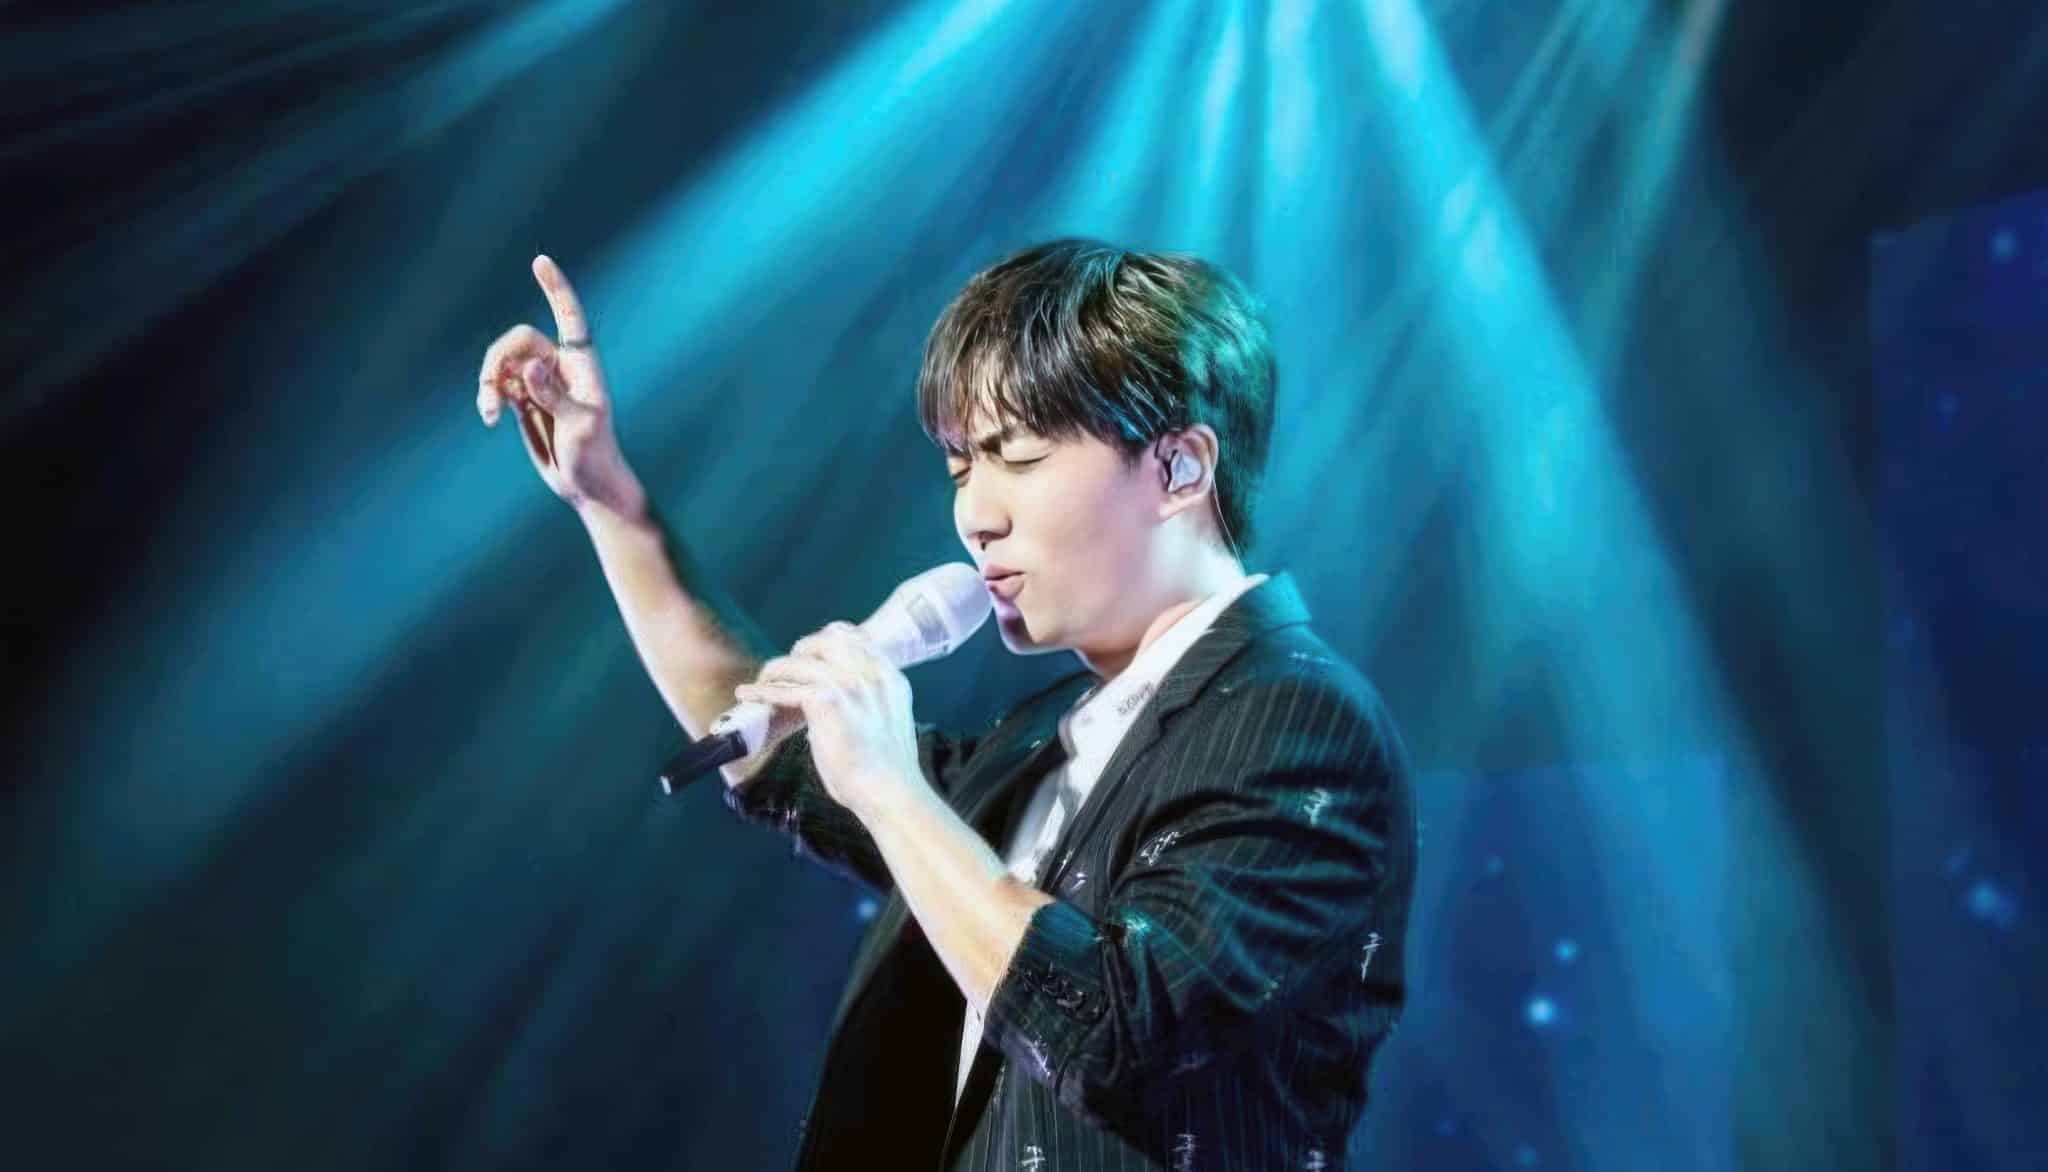 Project SuperStar singer Hong Junyang lost his voice for 6 months – but was instantly healed after a prayer